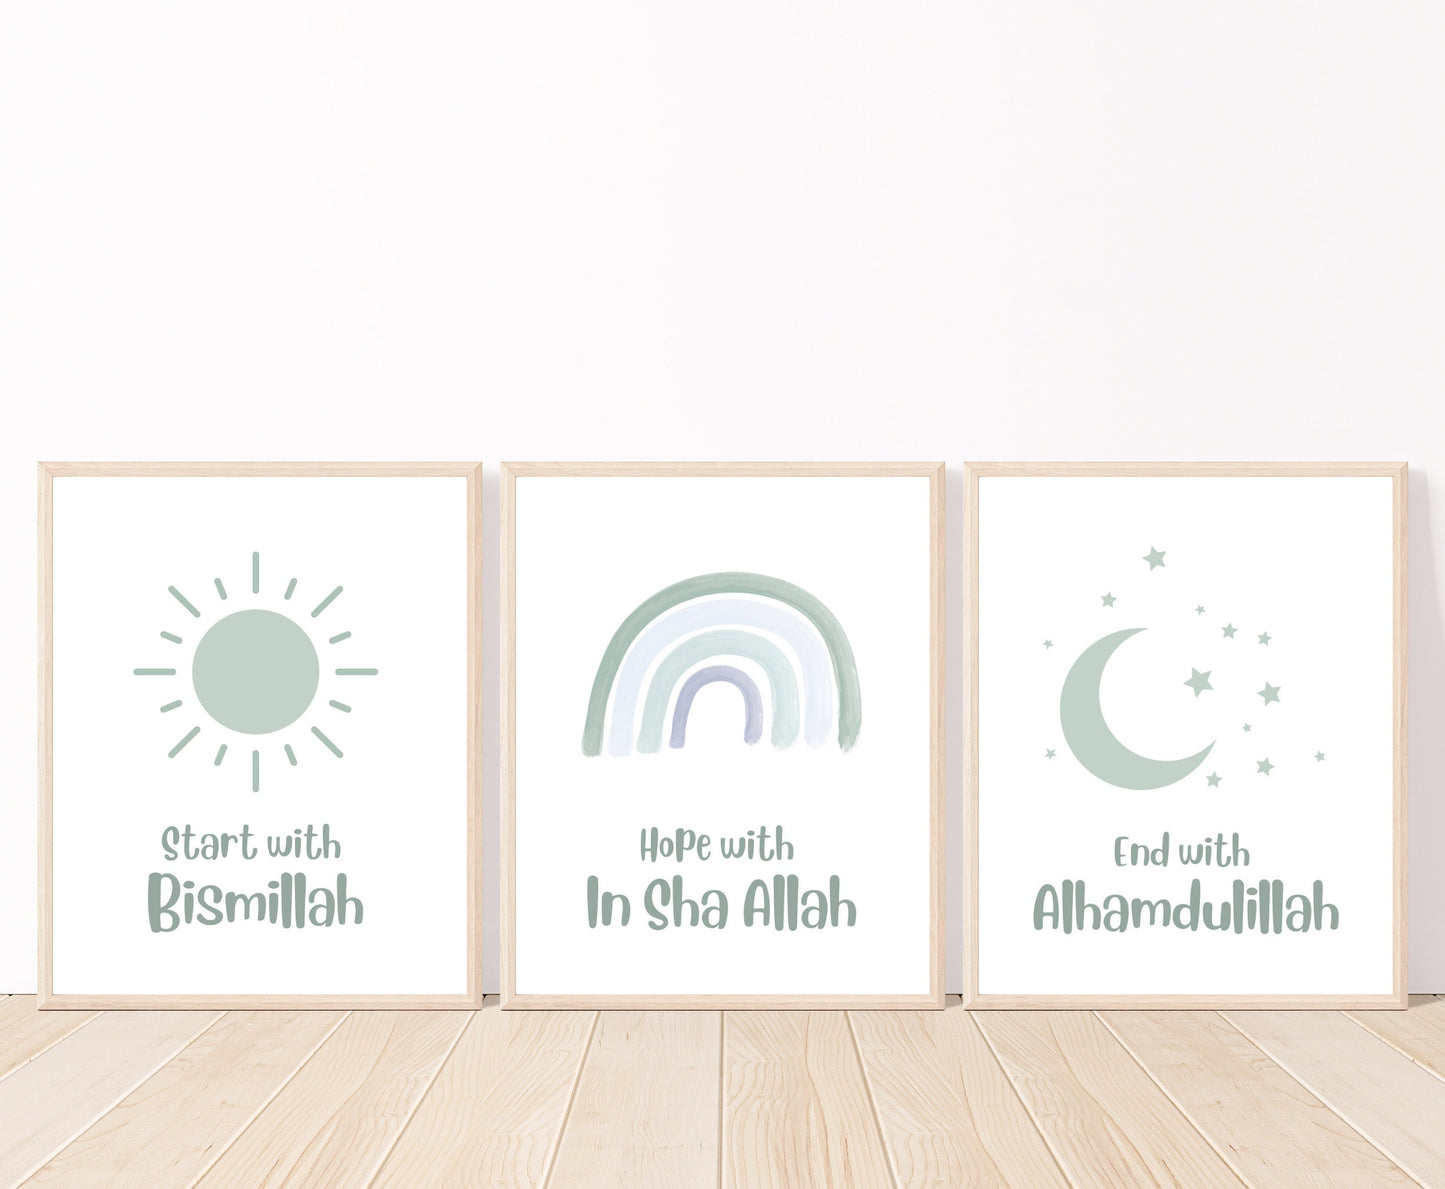 An image showing three graphics. The first one showing a baby blue sun with “Start with Bismillah” written in the same color, right below. The middle graphic is a green and baby blue ombre rainbow with “hope with In Sha Allah” written just below it. The last frame shows a graphic of a baby blue crescent and some tiny stars in the same color with “End with Alhamdulillah” written just below the latter.